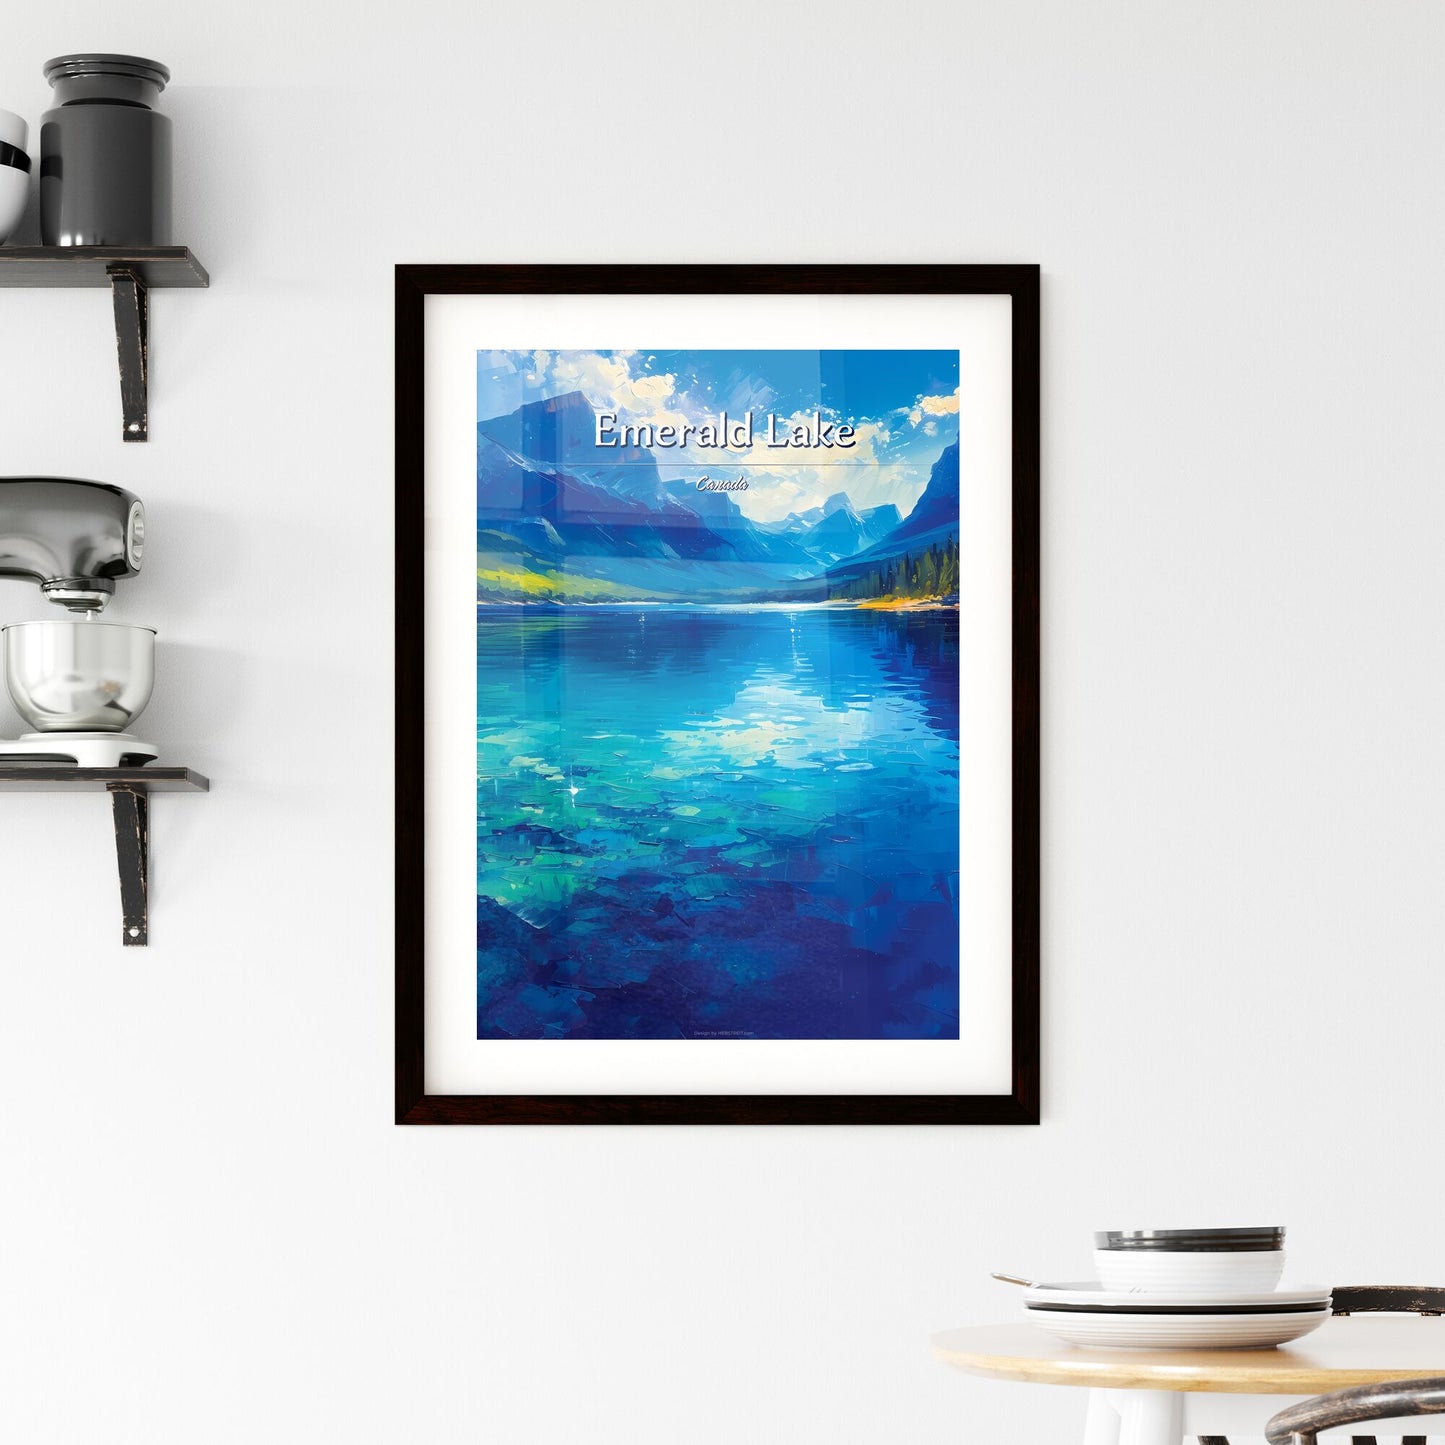 Emerald Lake, Canada - Art print of a blue lake with mountains and trees Default Title